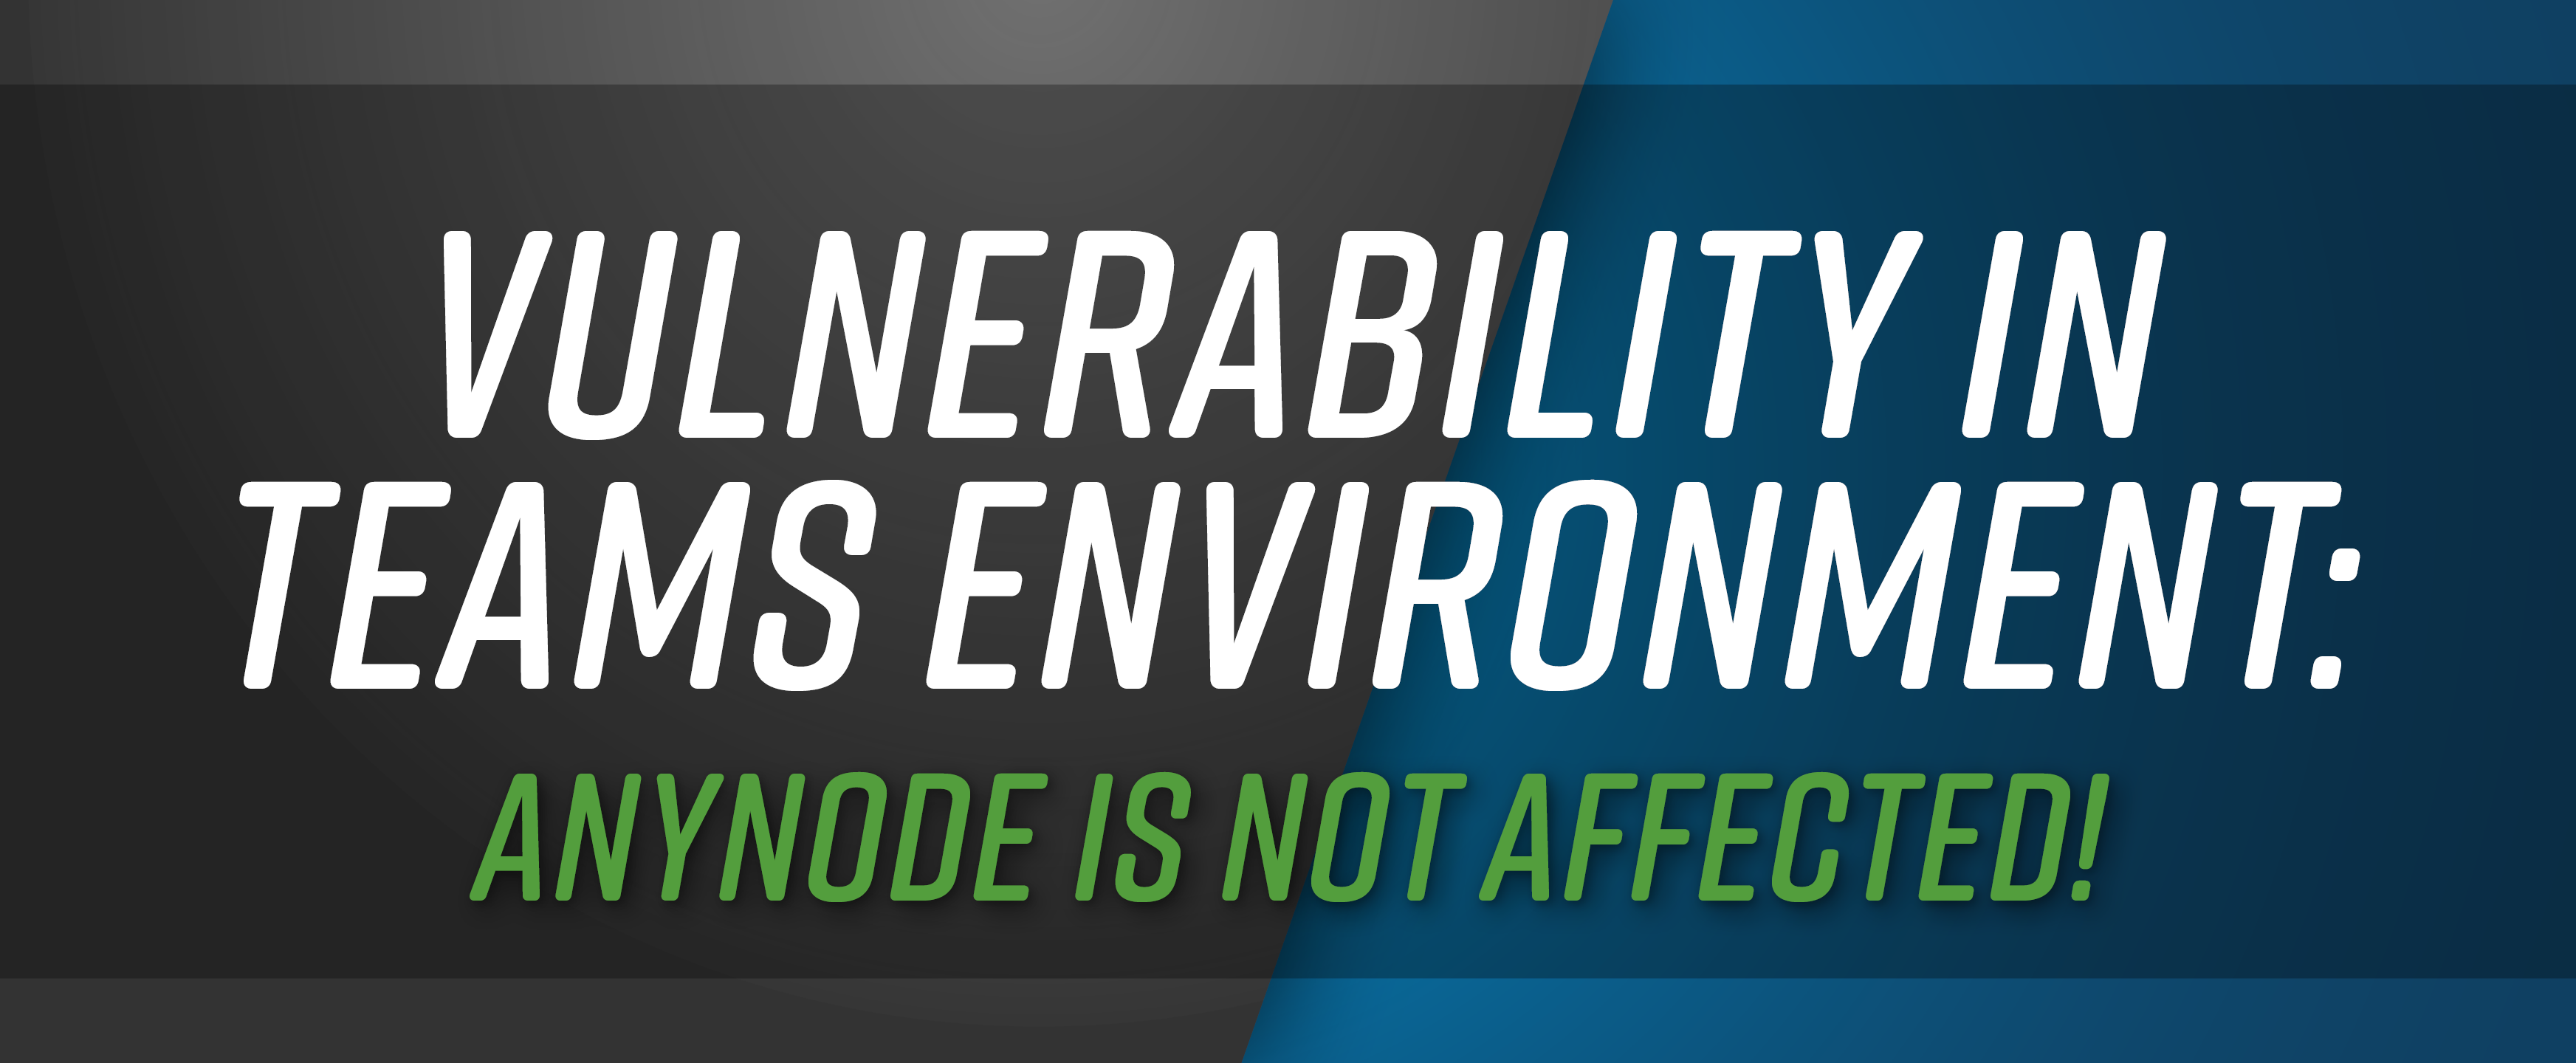 Potential Vulnerability in teams environment – anynode is not affected